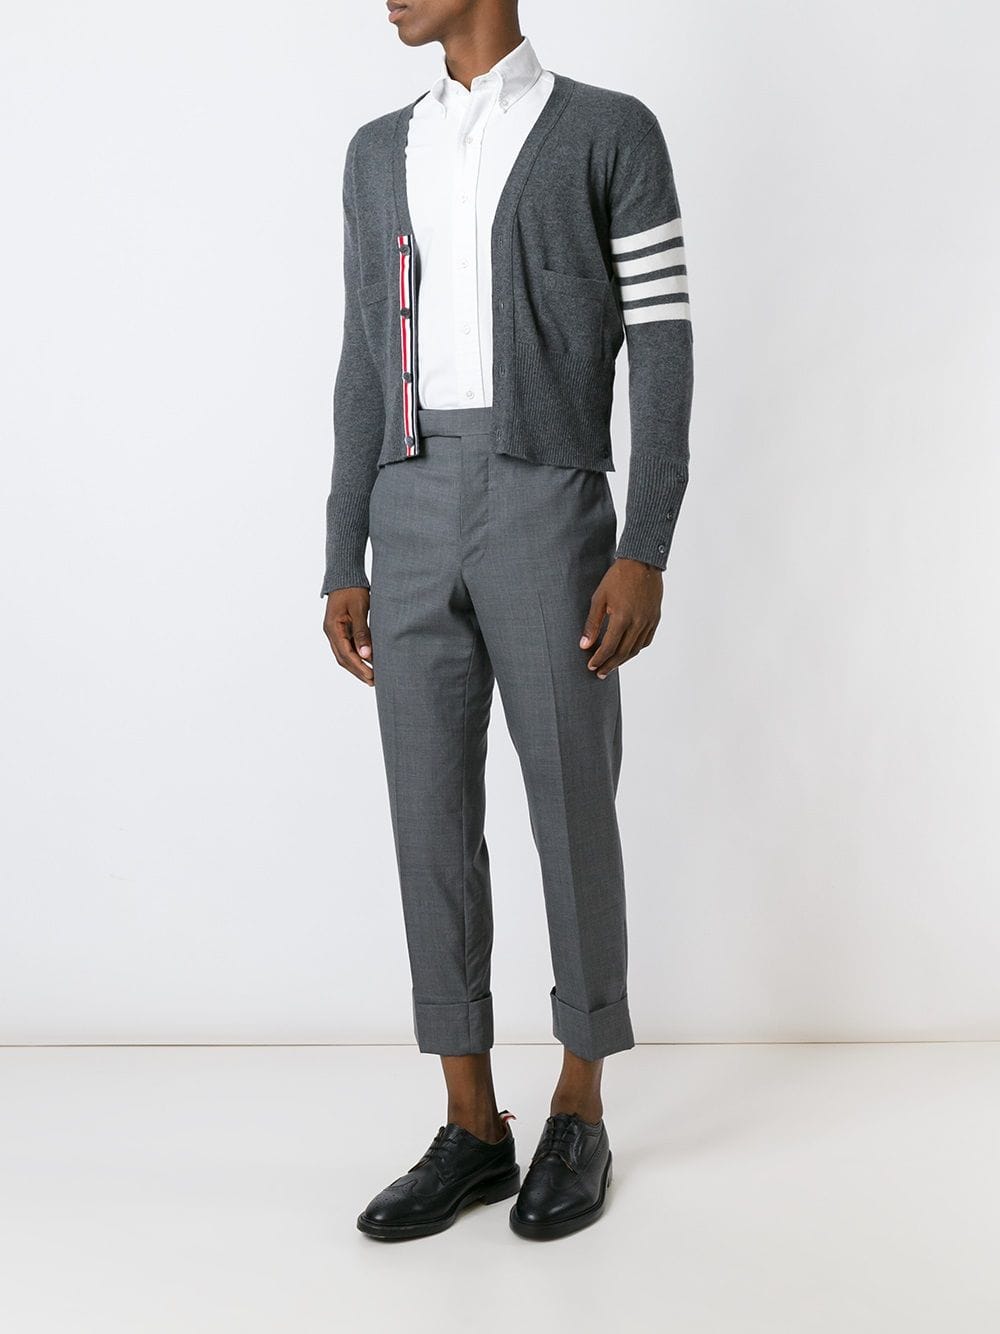 THOM BROWNE Men Classic V Neck Cardigan With White 4 Bar Stripe In Cashmere